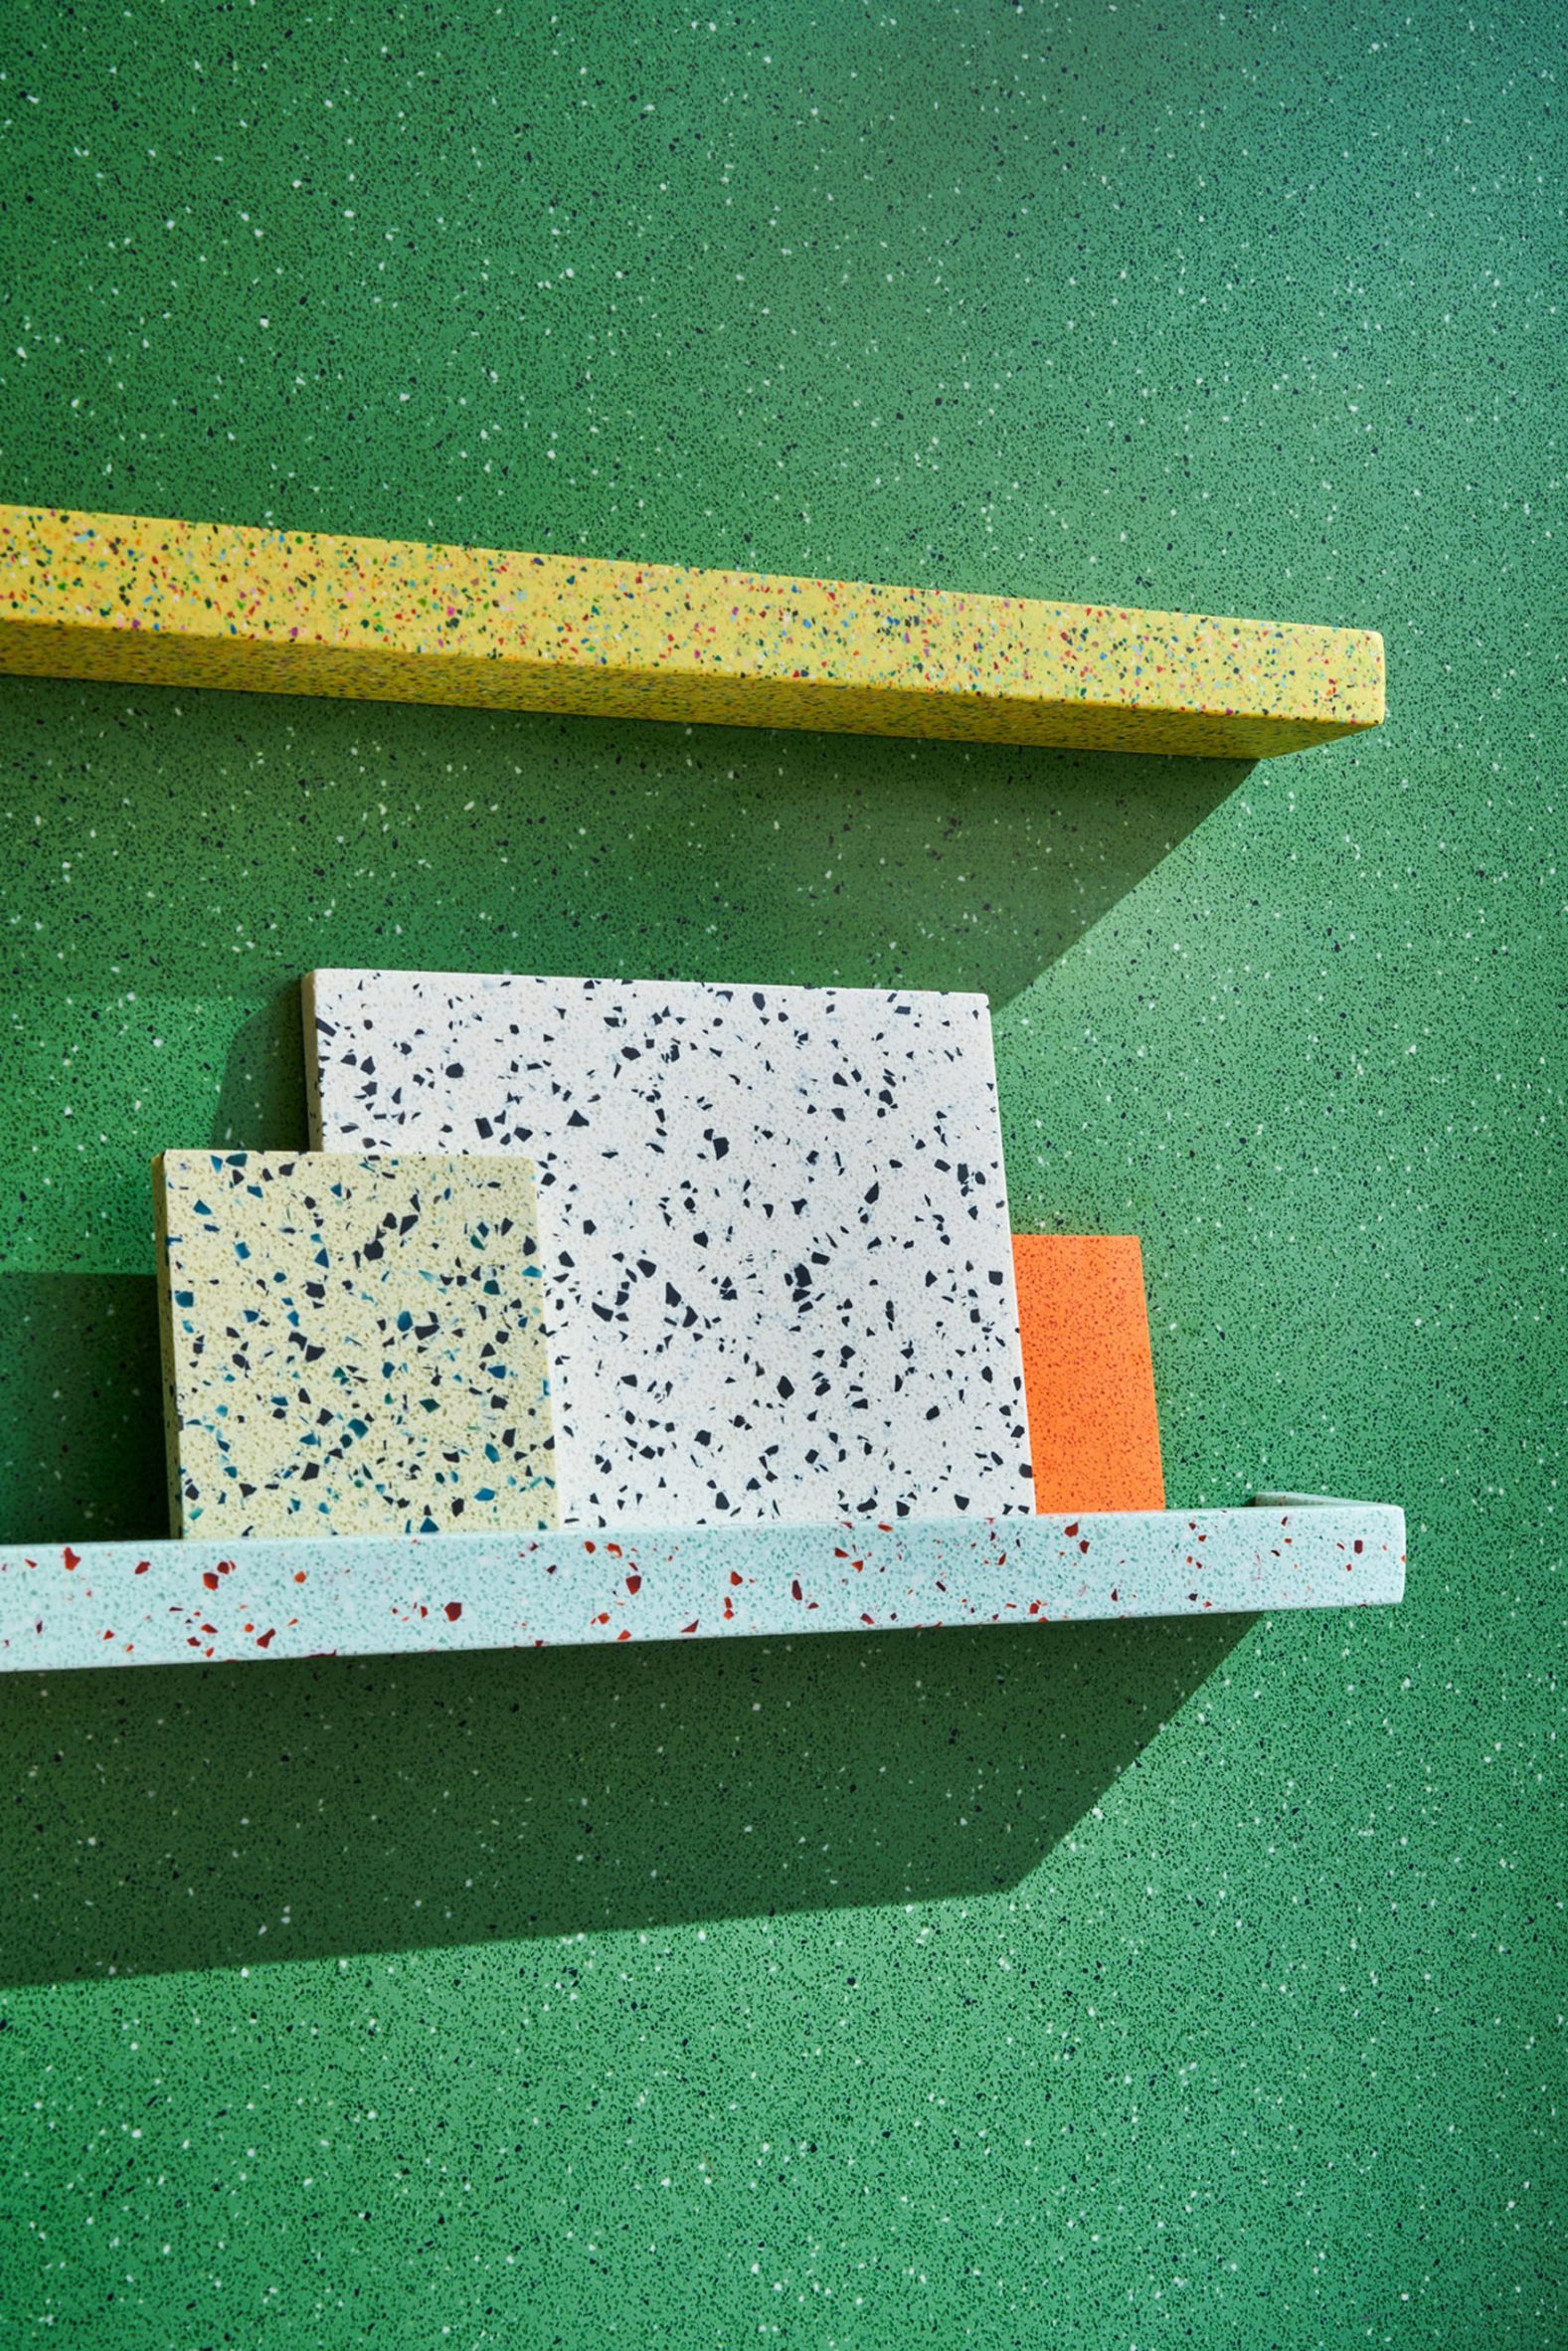 Durat material samples on a shelf in front of a green wall